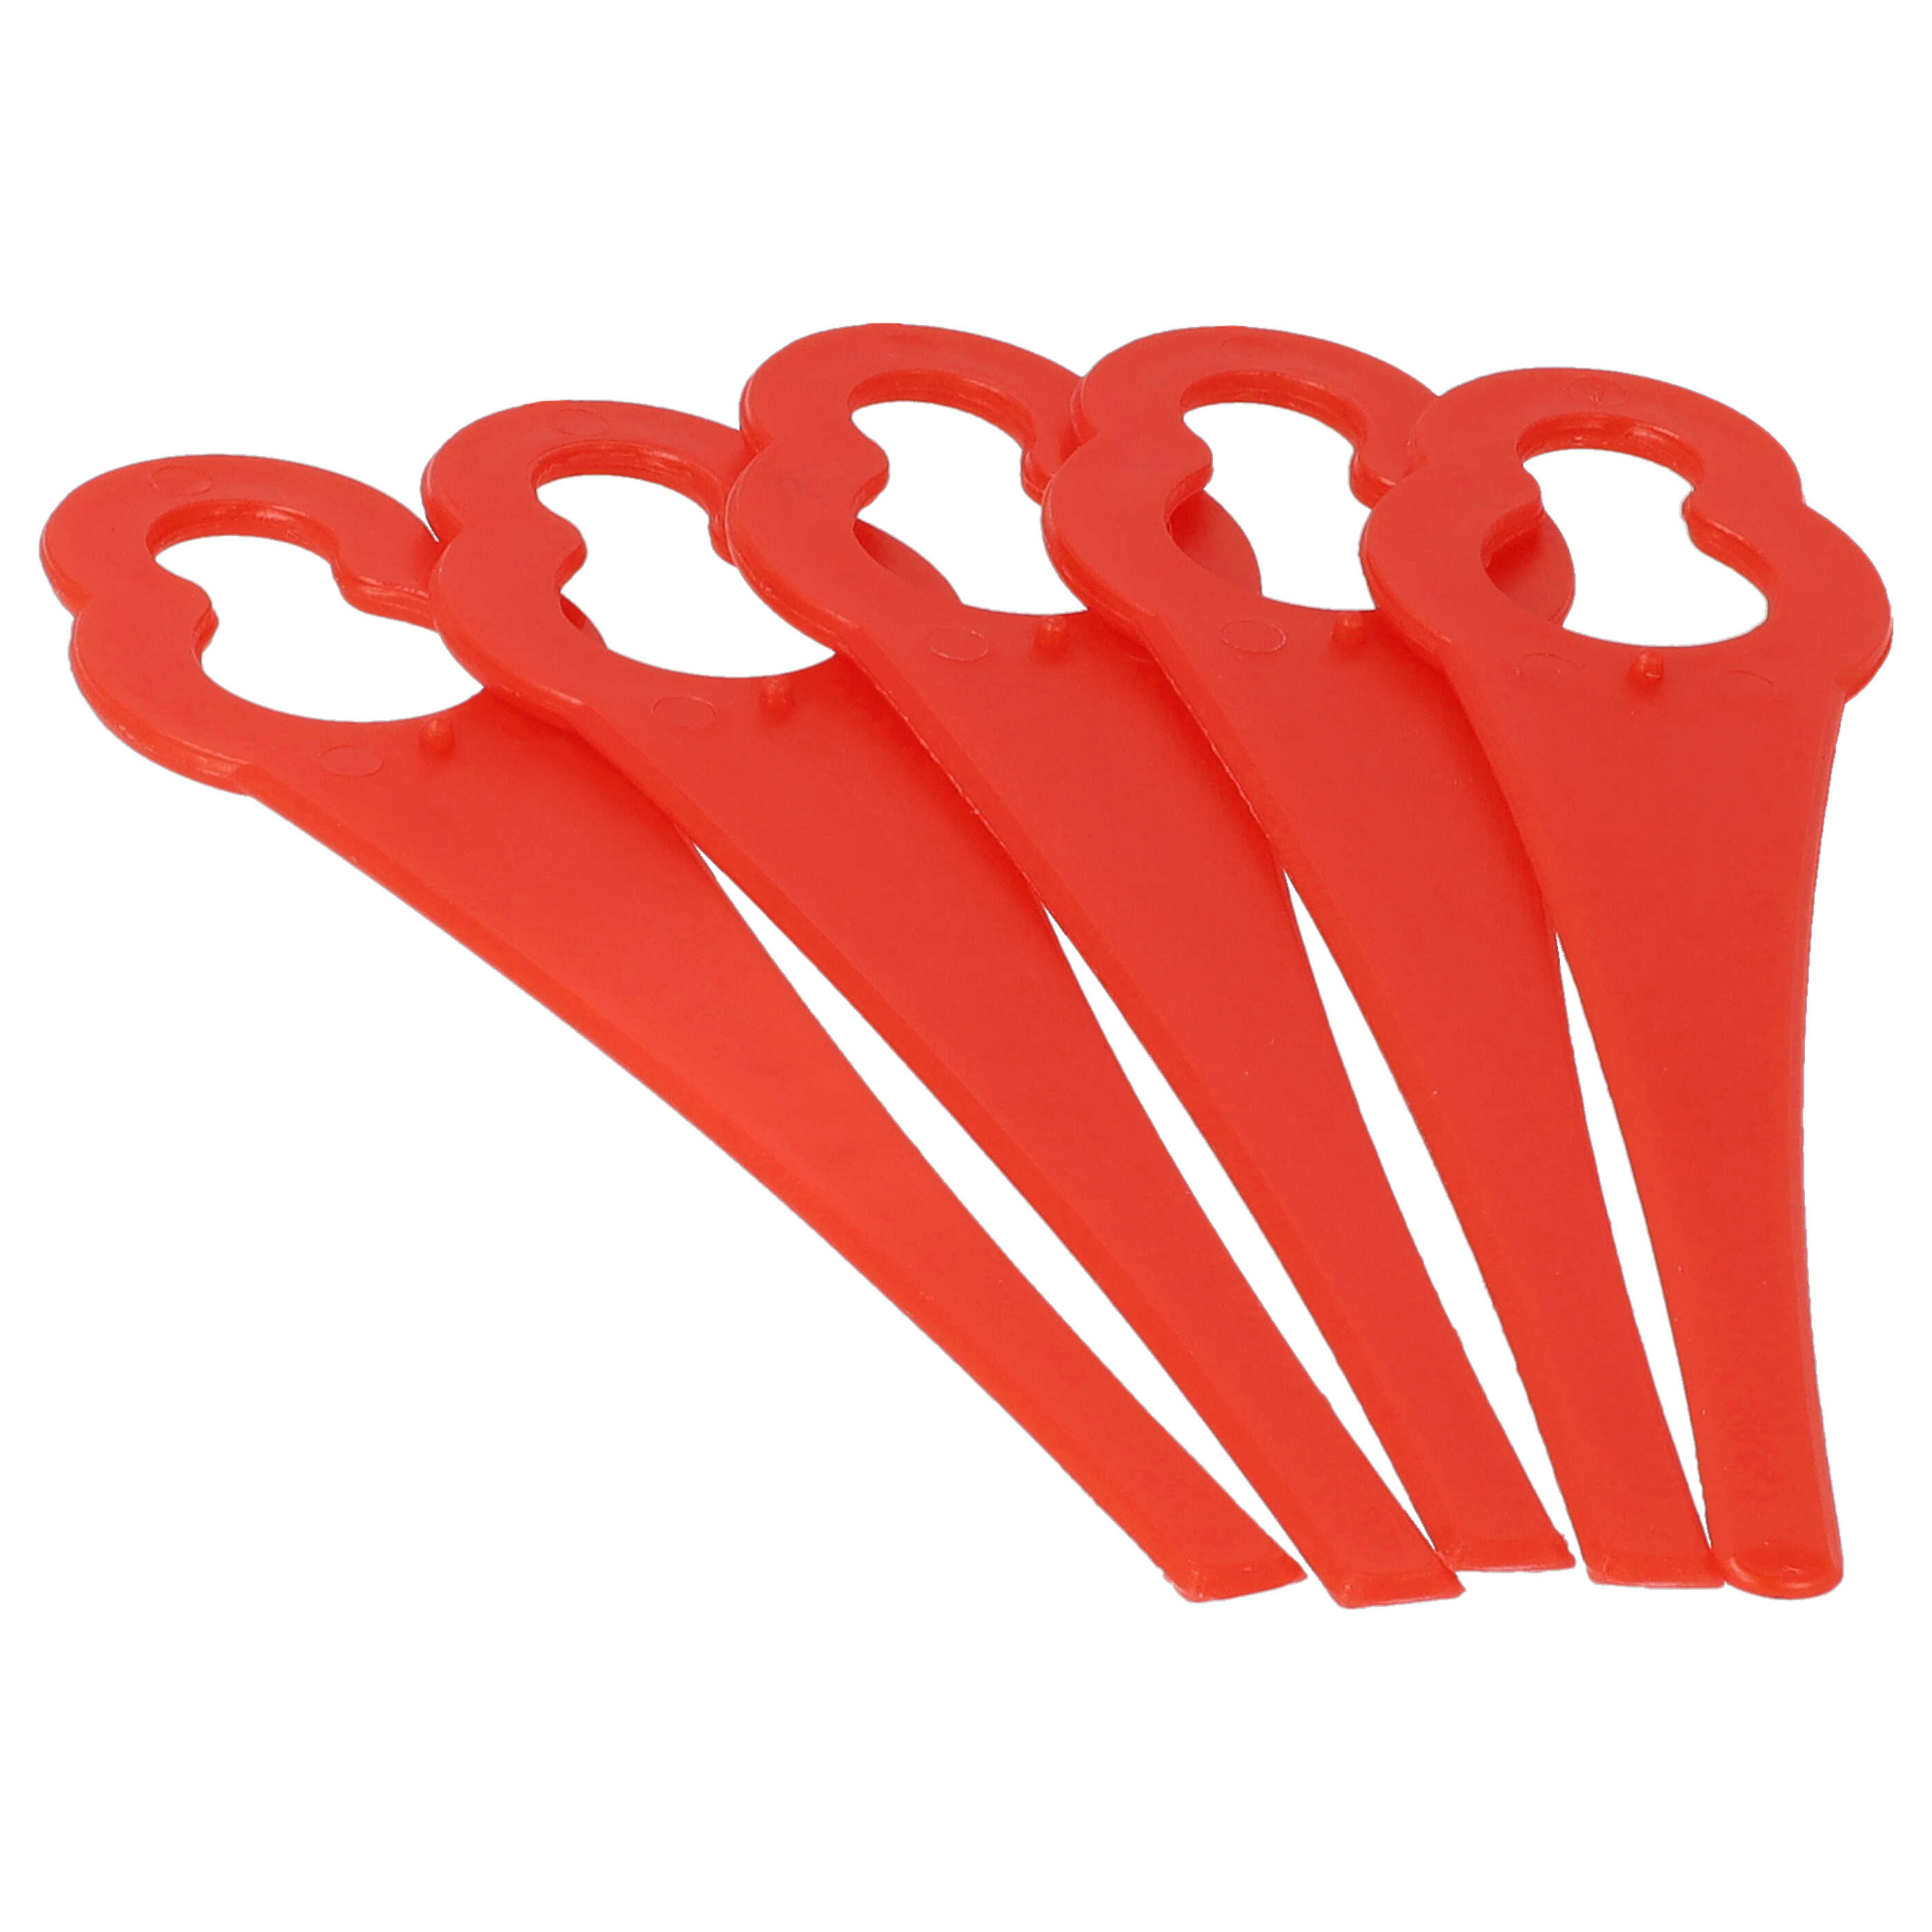 20x Exchange Blade replaces ALM BQ026 for Cordless Strimmer etc. - nylon / plastic, red